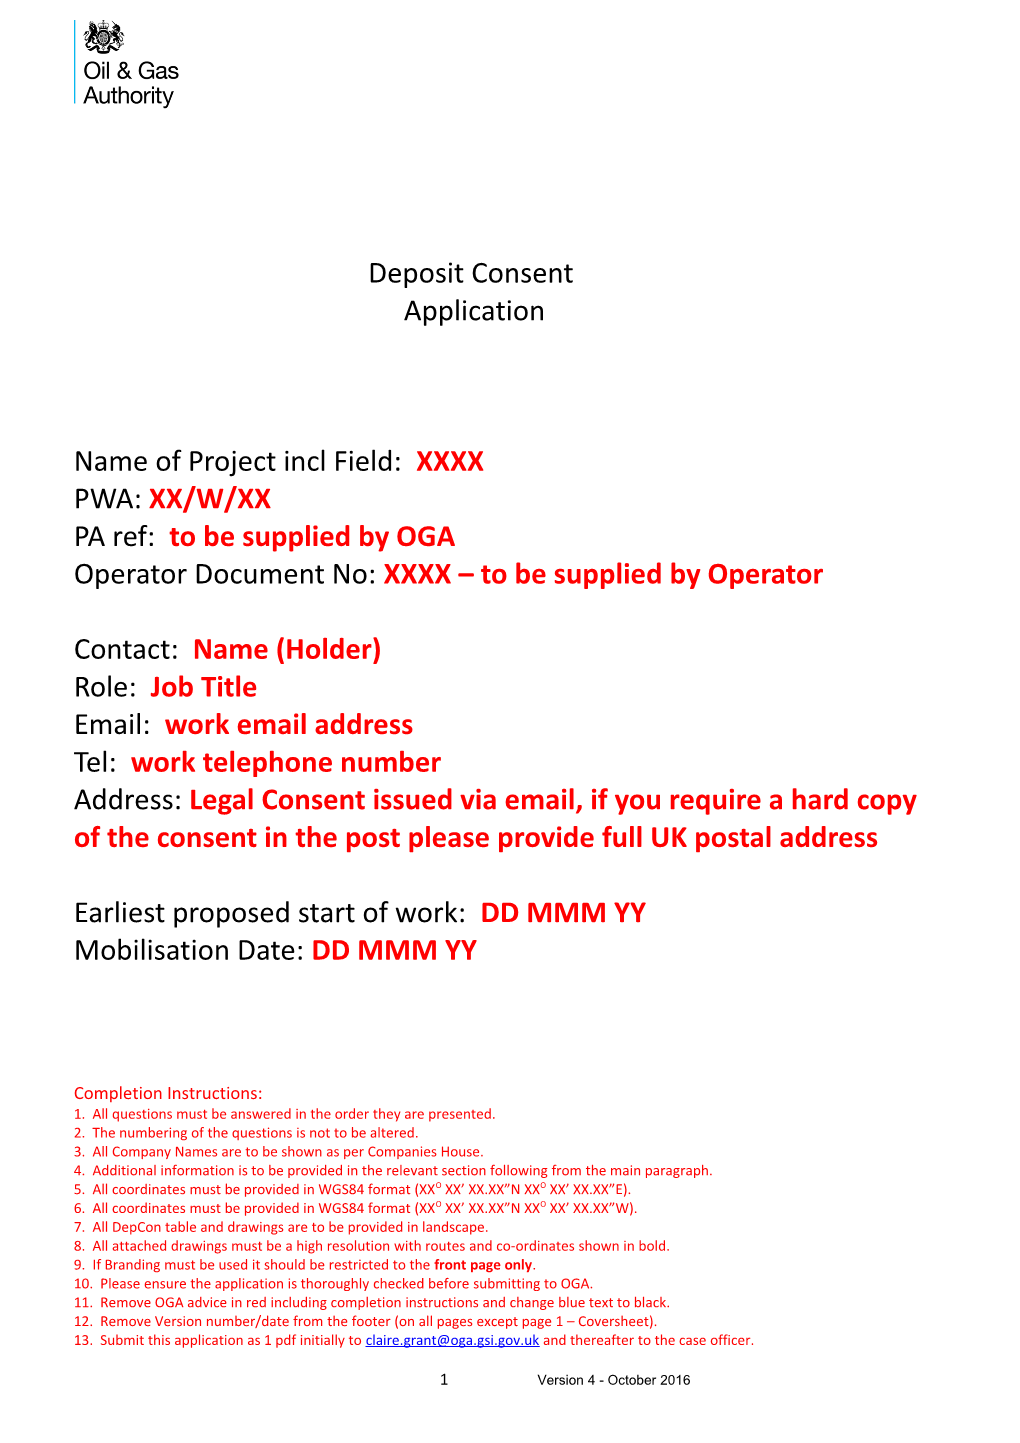 Name of Project Incl Field: XXXX